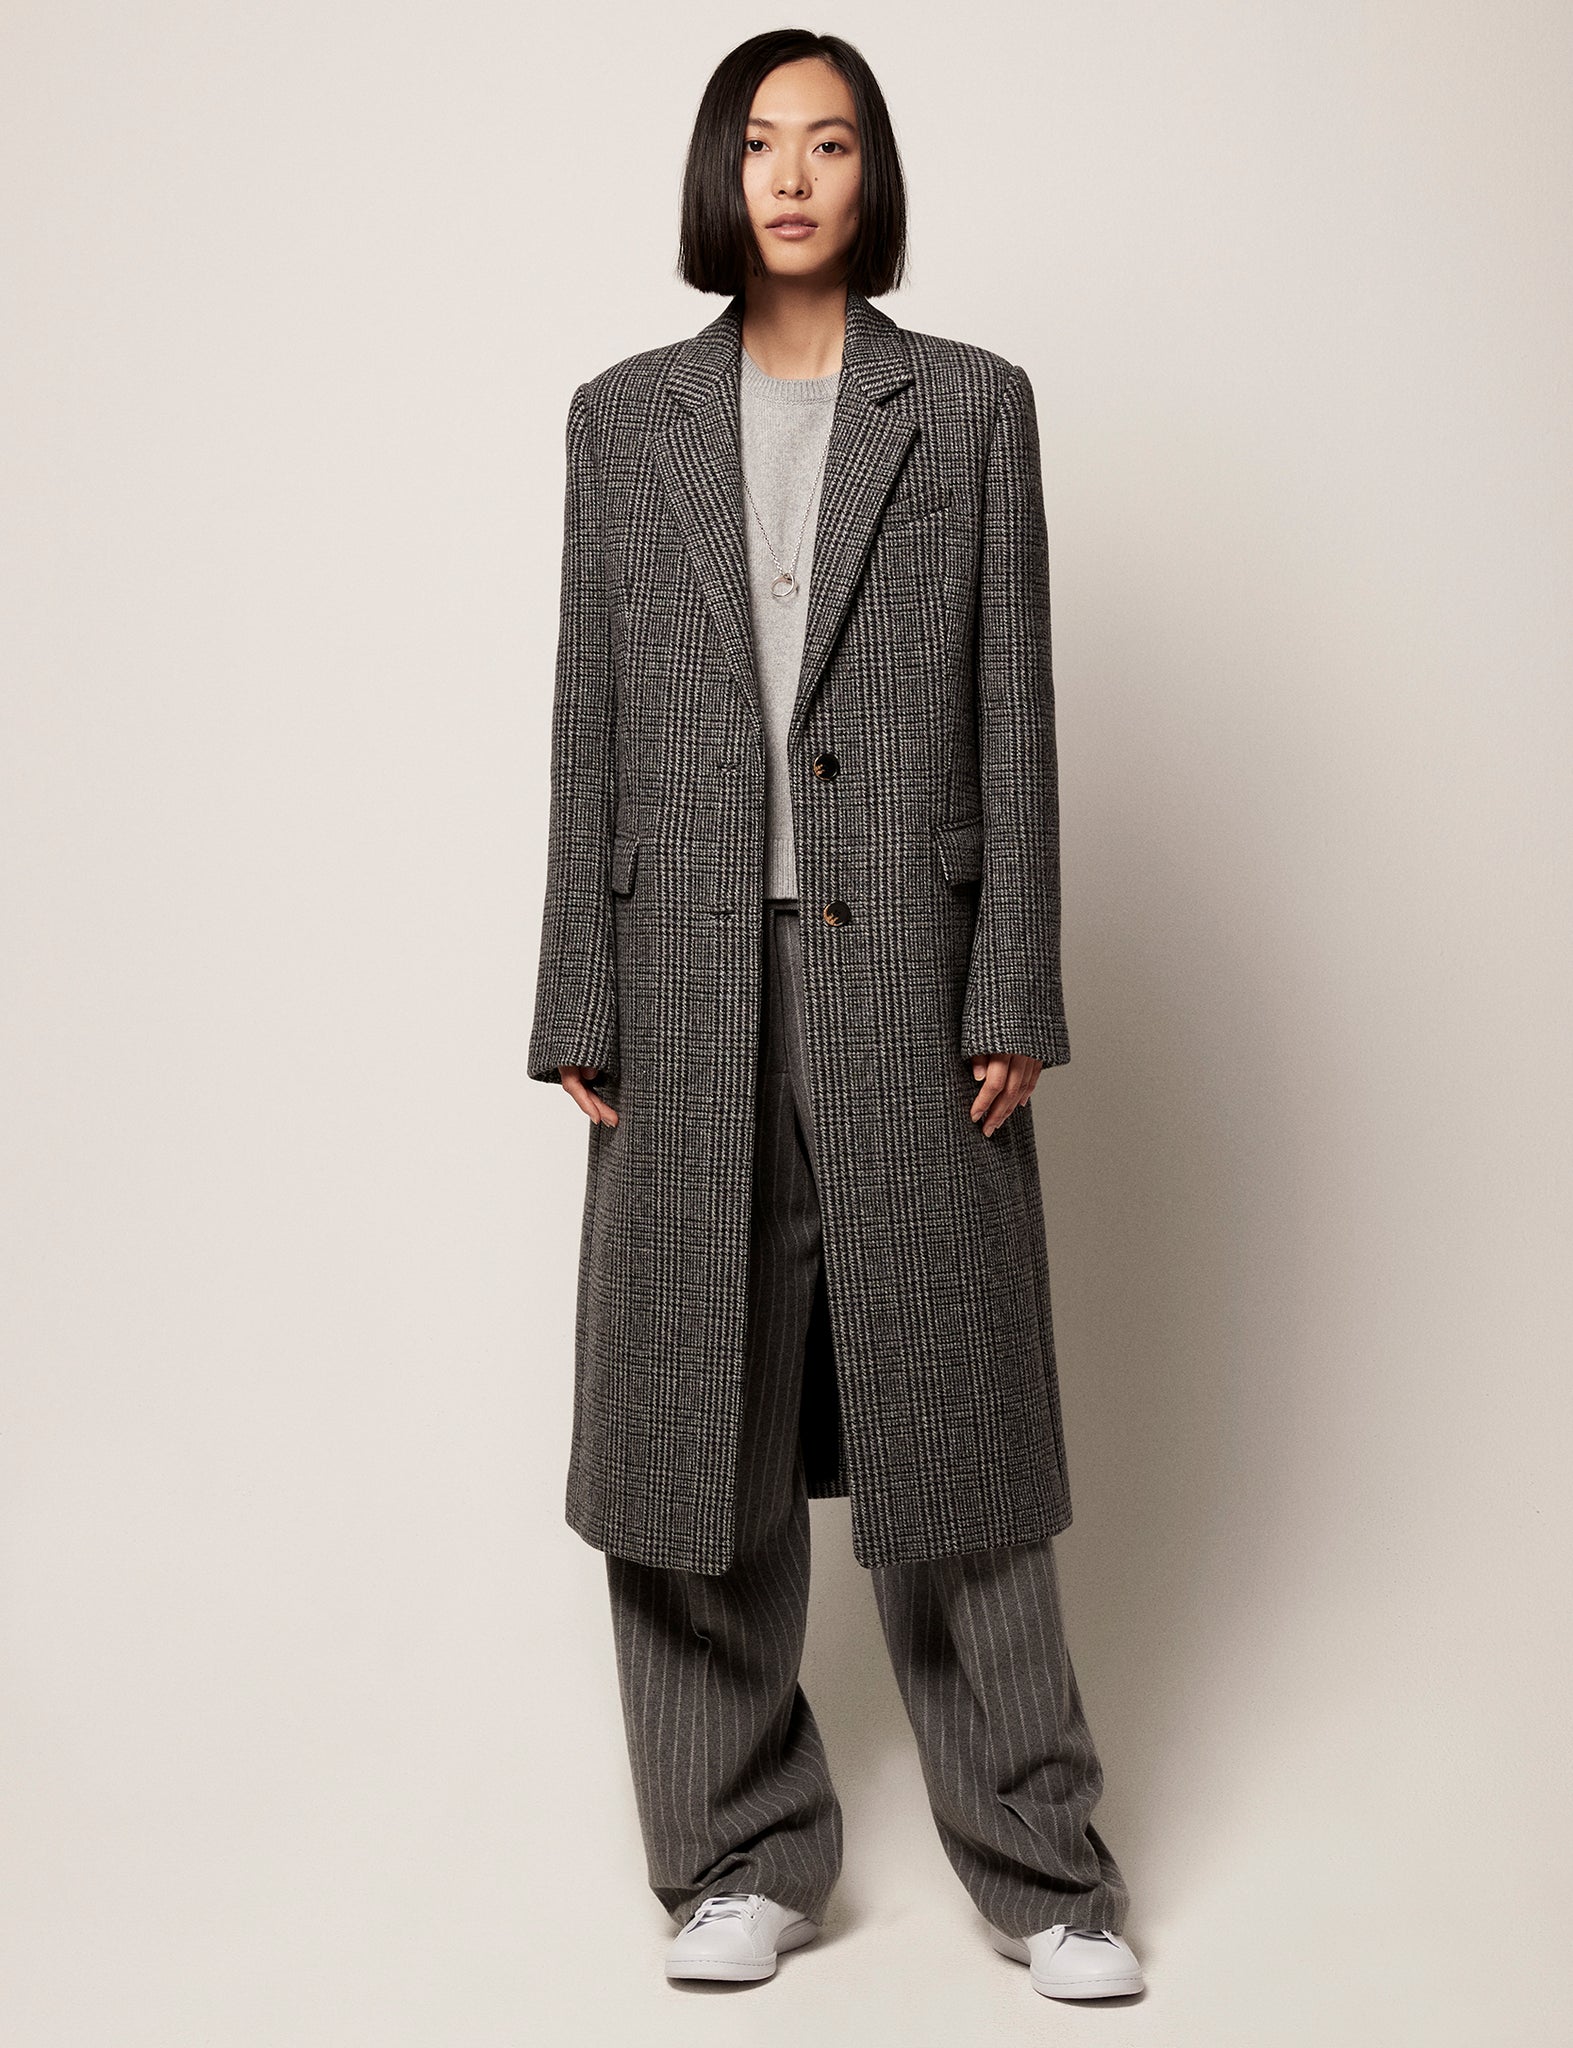 Another Tomorrow Prince Of Wales Check Wool-blend Coat In Black/grey